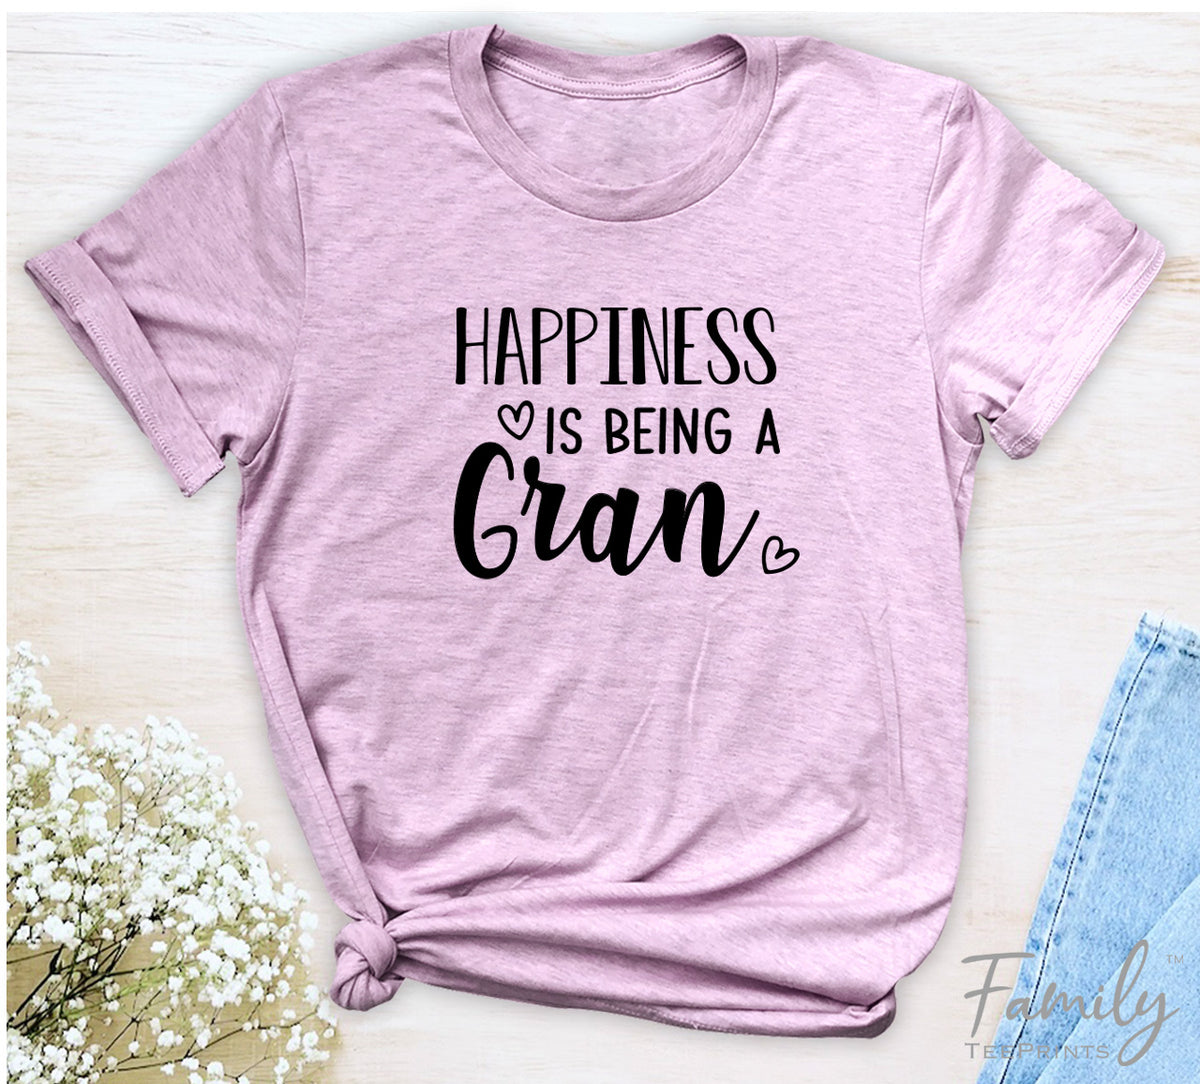 Happiness Is Being A Gran - Unisex T-shirt - Gran Shirt - Gift for Gran - familyteeprints